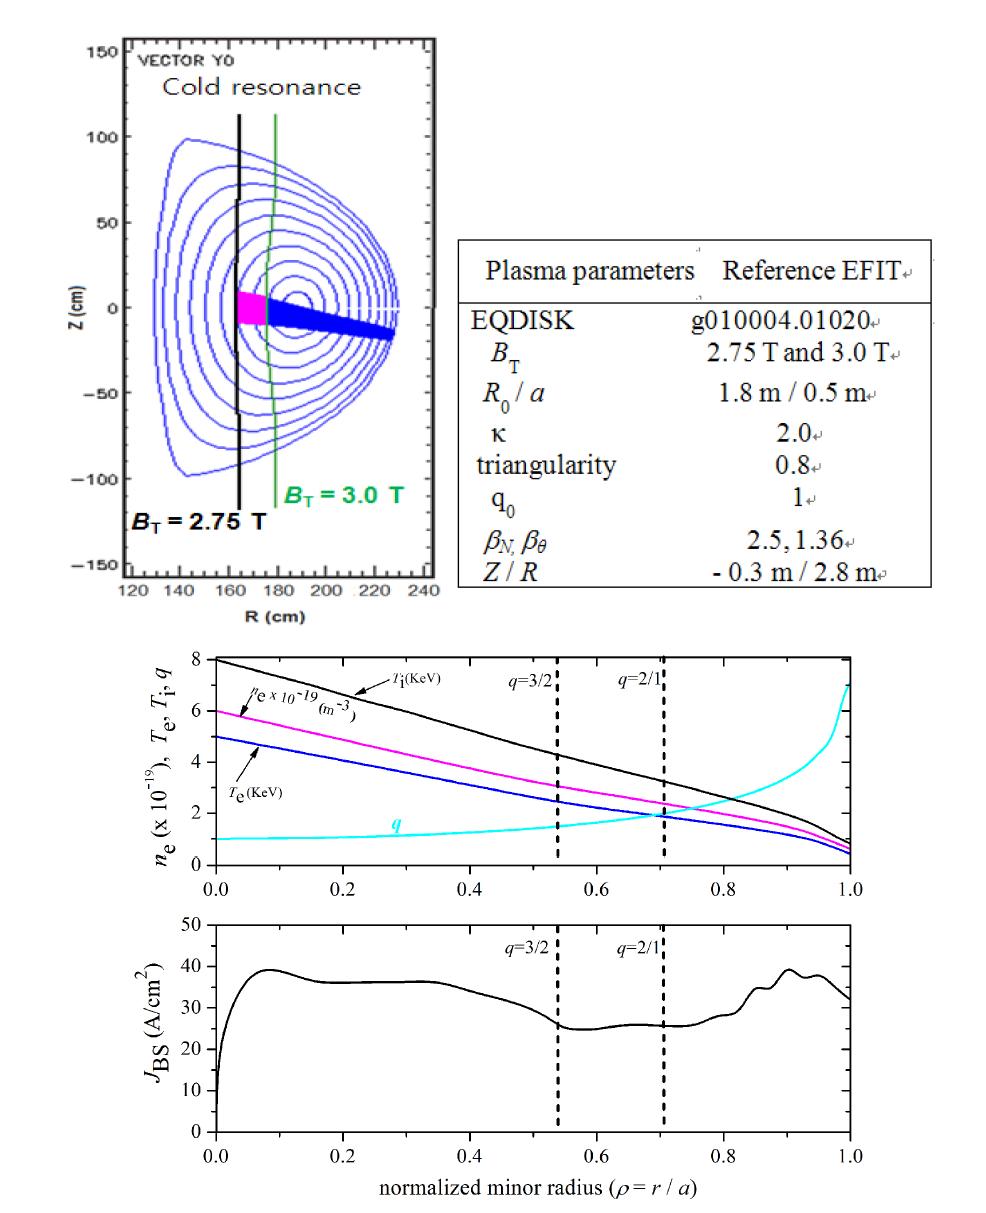 The ray tracing of 170 GHz EC beam from launcher pivot at -30 cm in the KSTAR plasma equilibrium with BT=2.75 and 3.0 T.